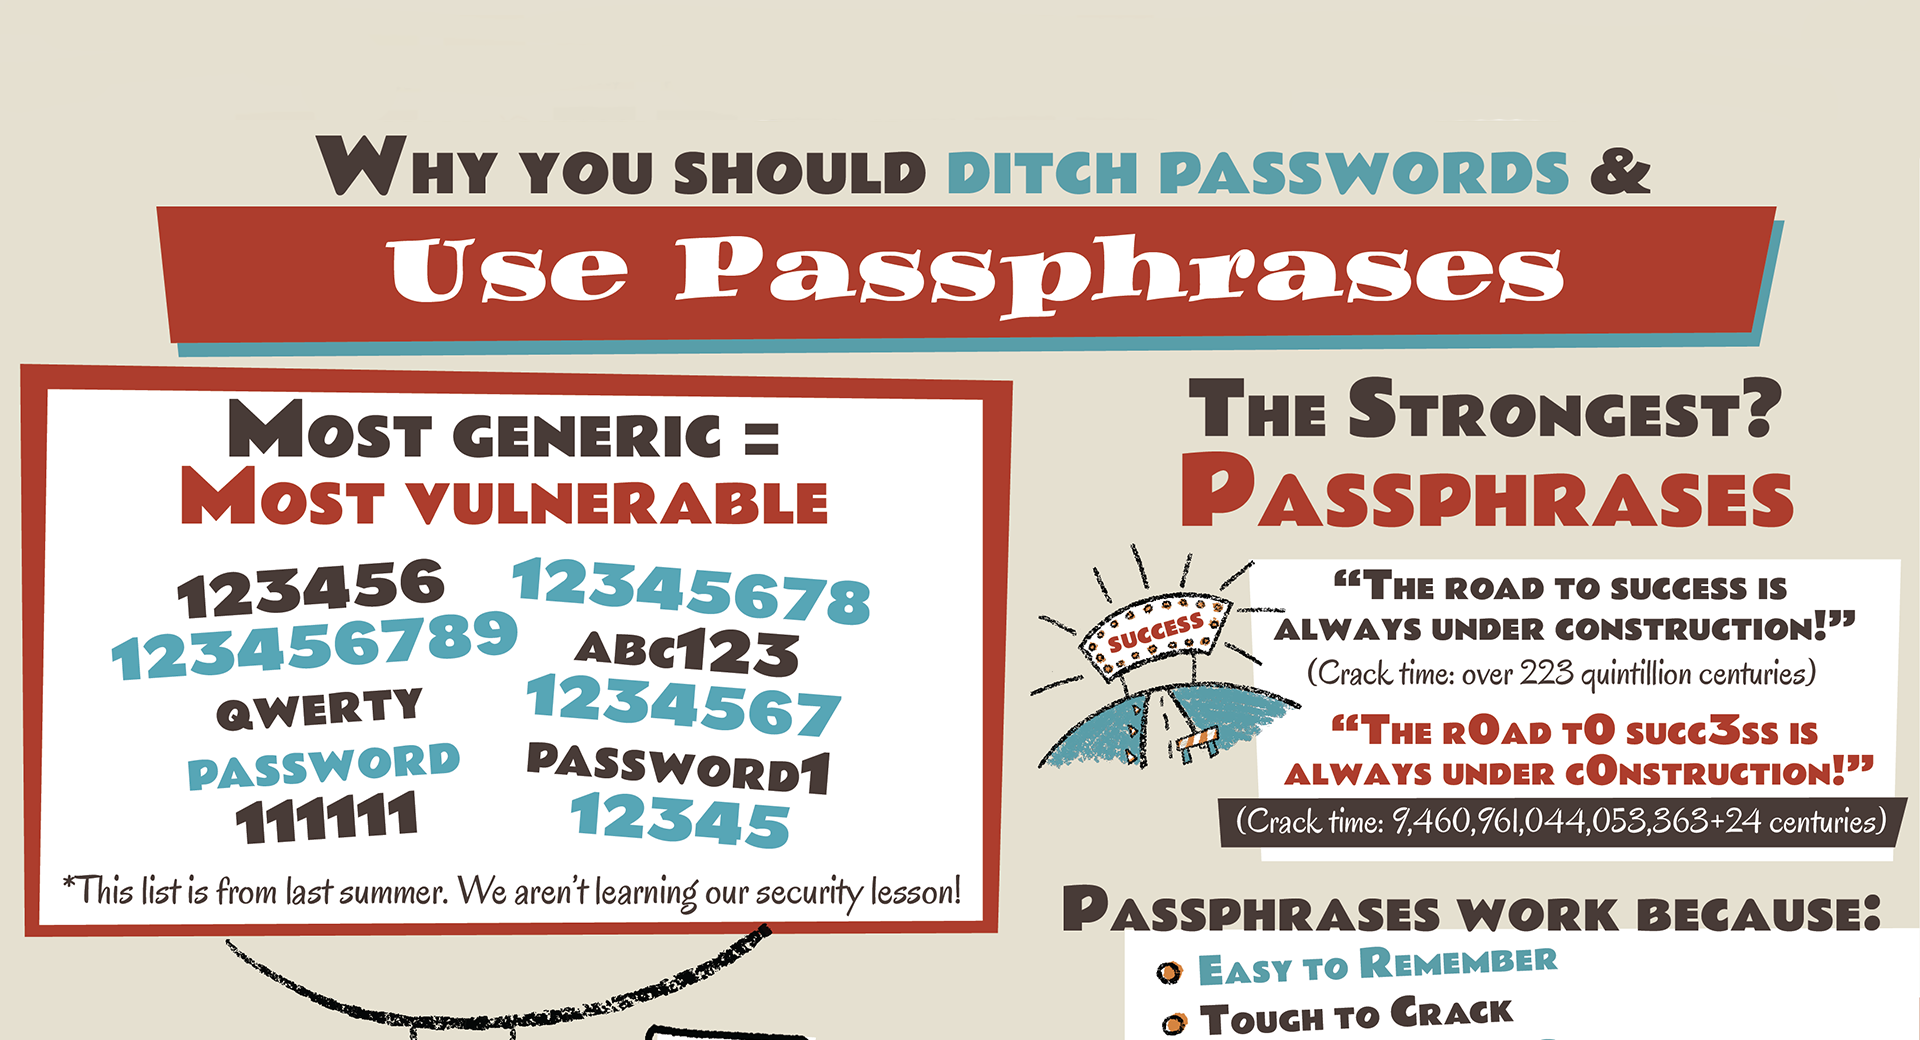 One-Page Pitch: Why You Should Ditch Passwords and Use Passphrases